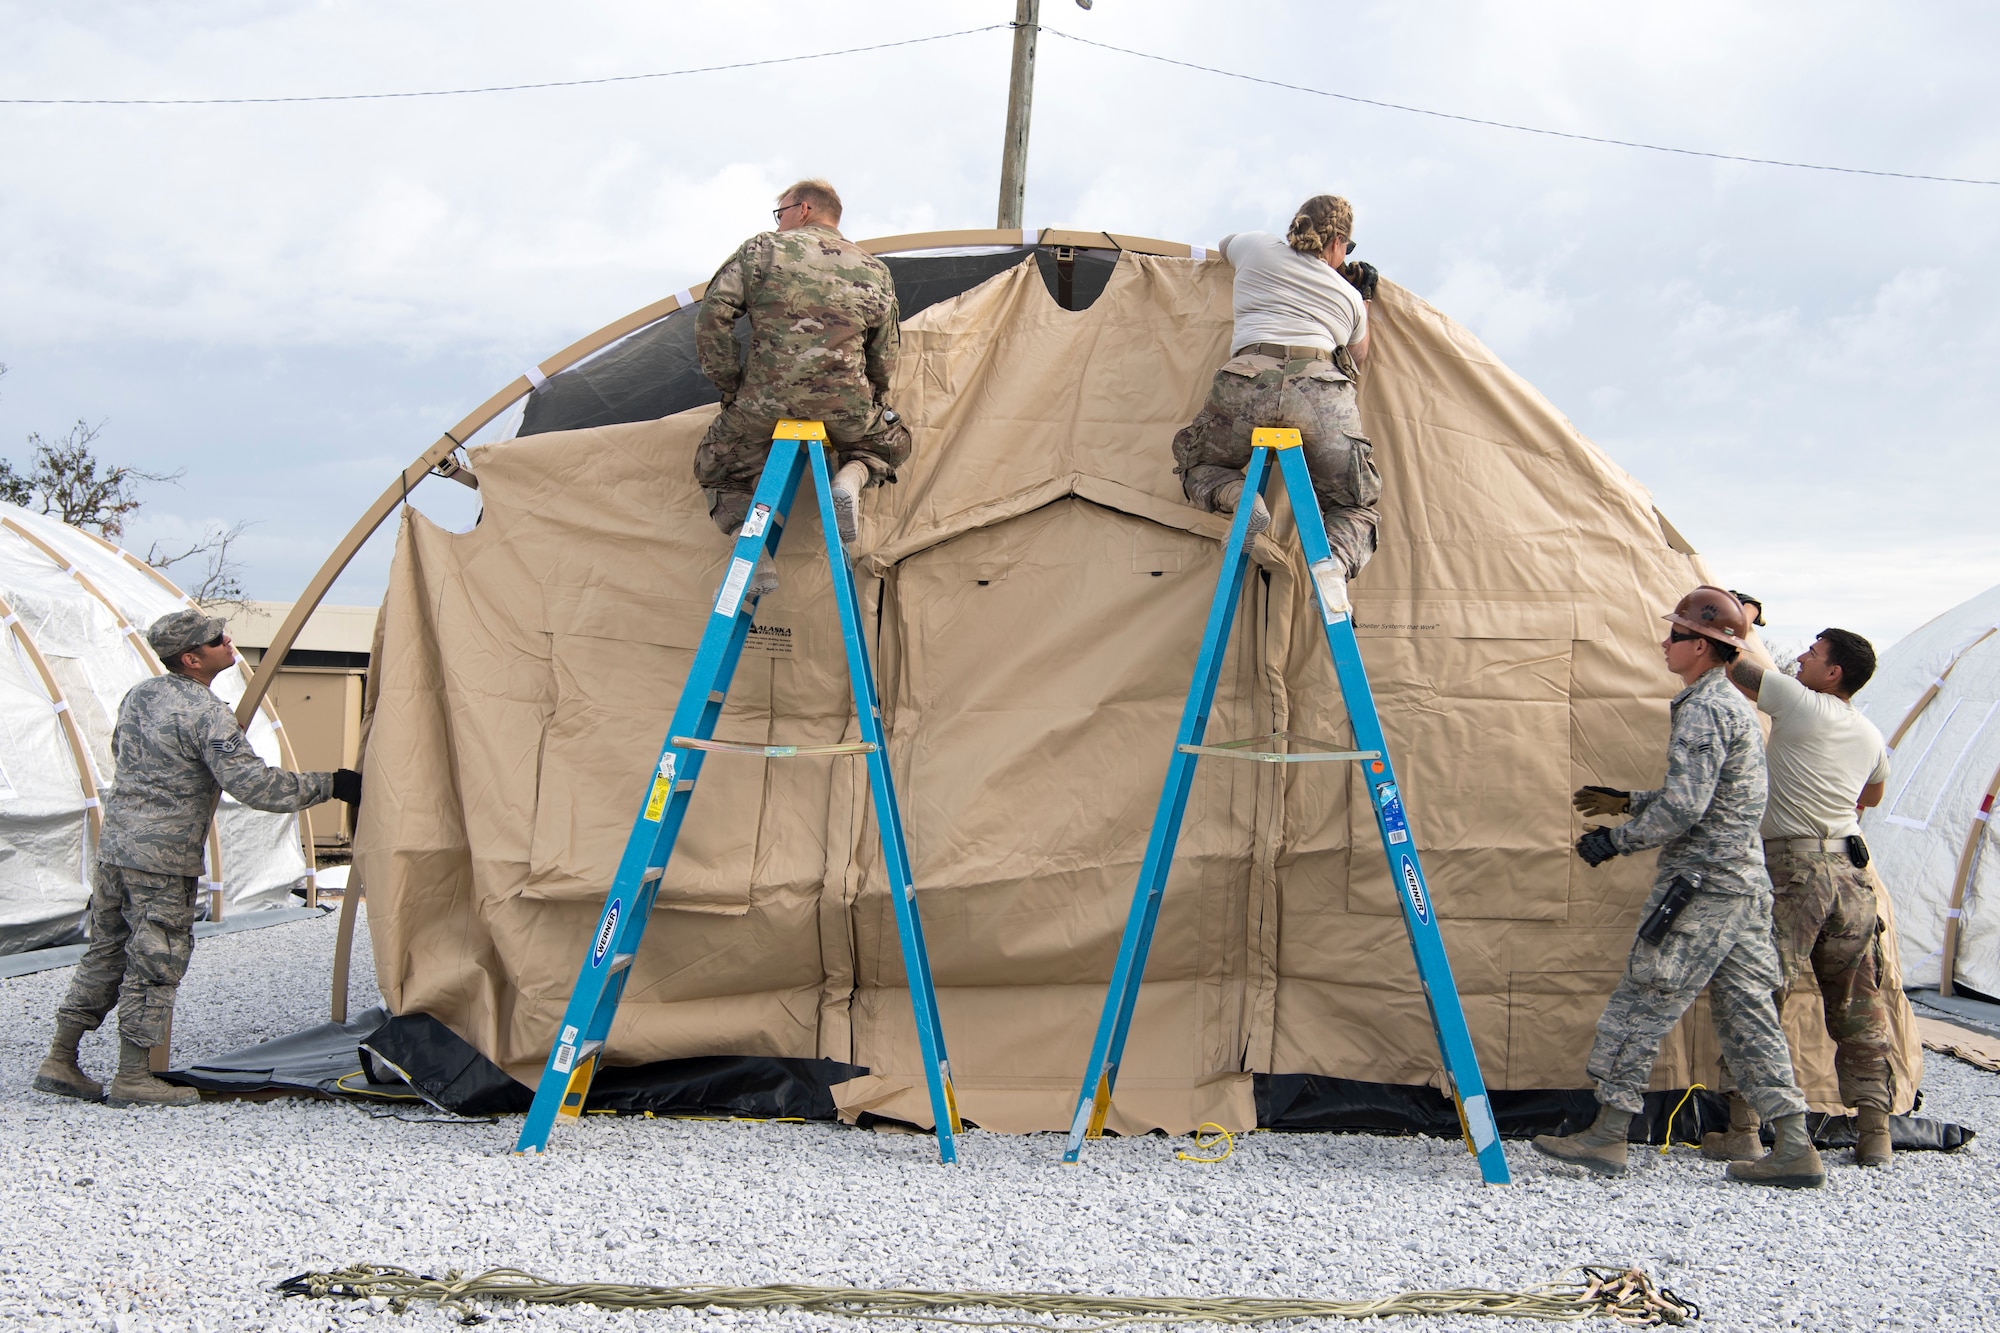 Tent City' brings relief to Airmen > Air Force > Article Display